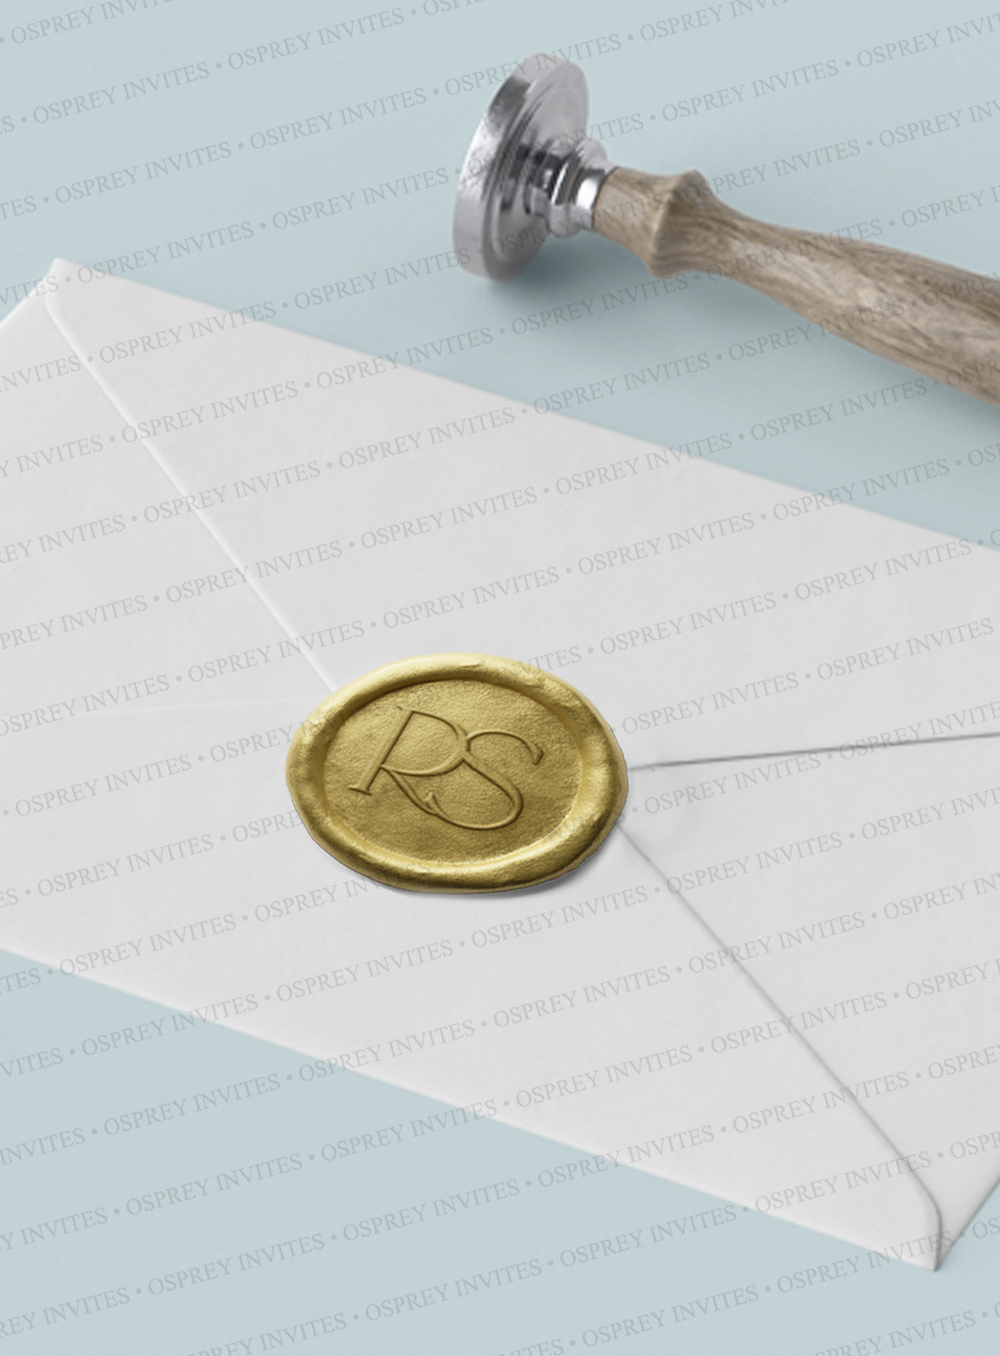 Self adhesive wax seals stickers in India which can be customied wedding monogram with couple's name, these are customised wax seal stickers to use in printed invitation design and wedding stationery suite.